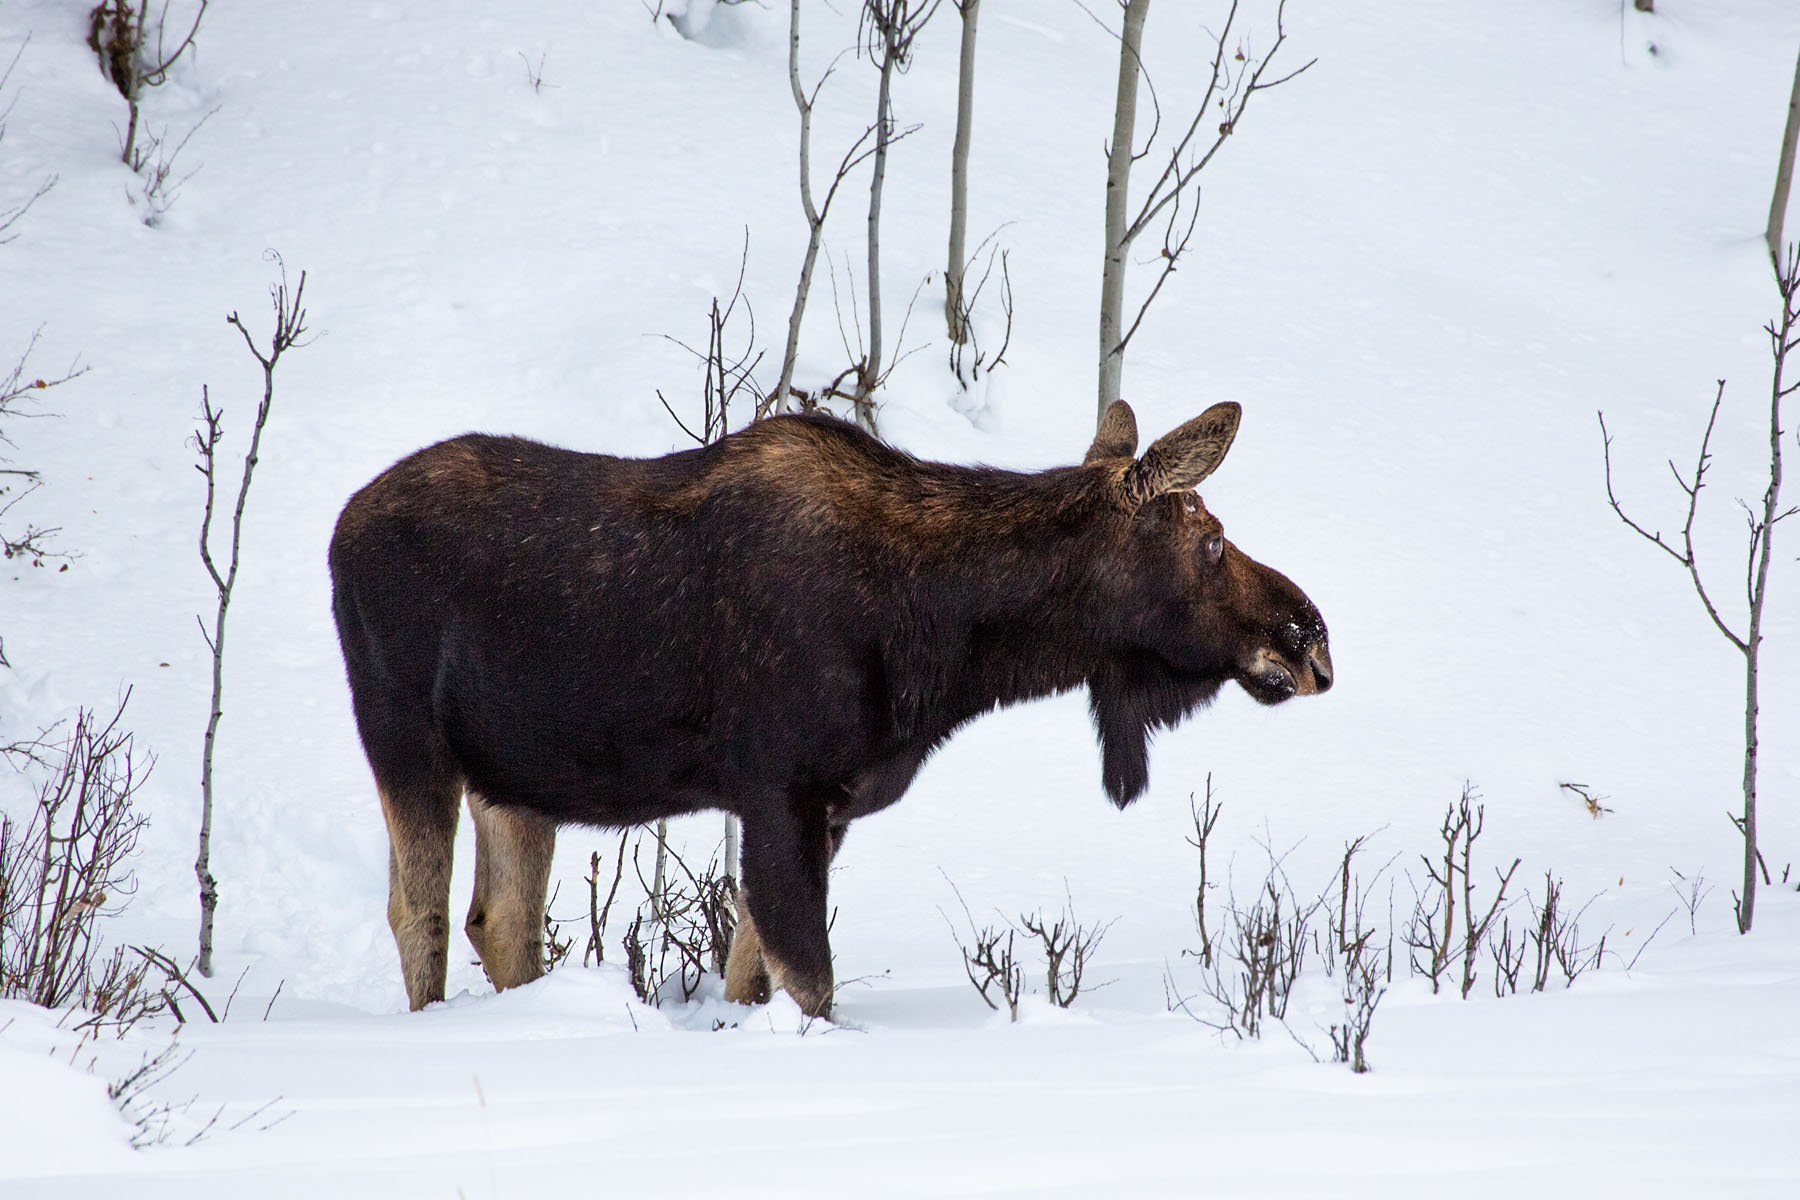 Moose sees another moose emerge from the woods a few yards away, Yellowstone, February 2022.  Click for next photo.